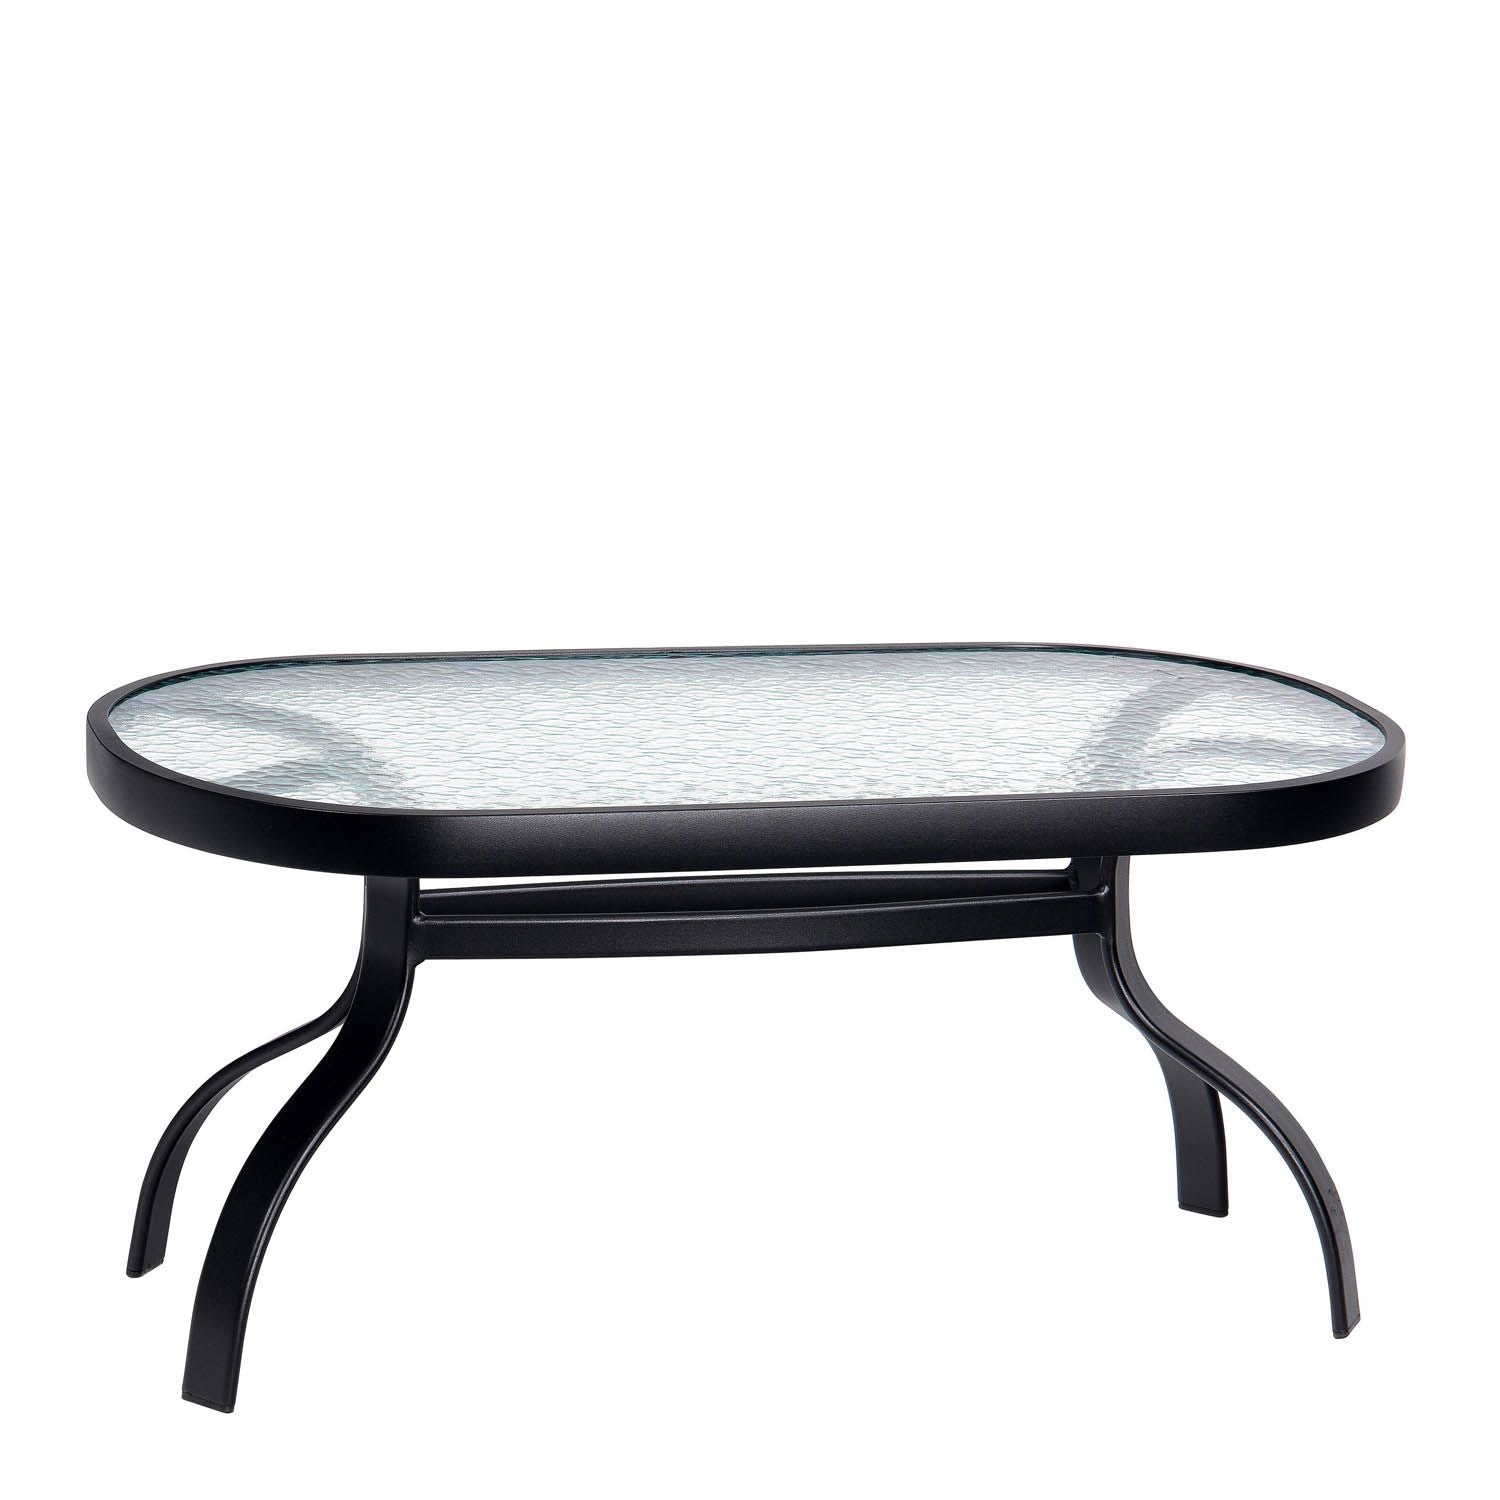 Deluxe Obscure Glass Oval Coffee Table